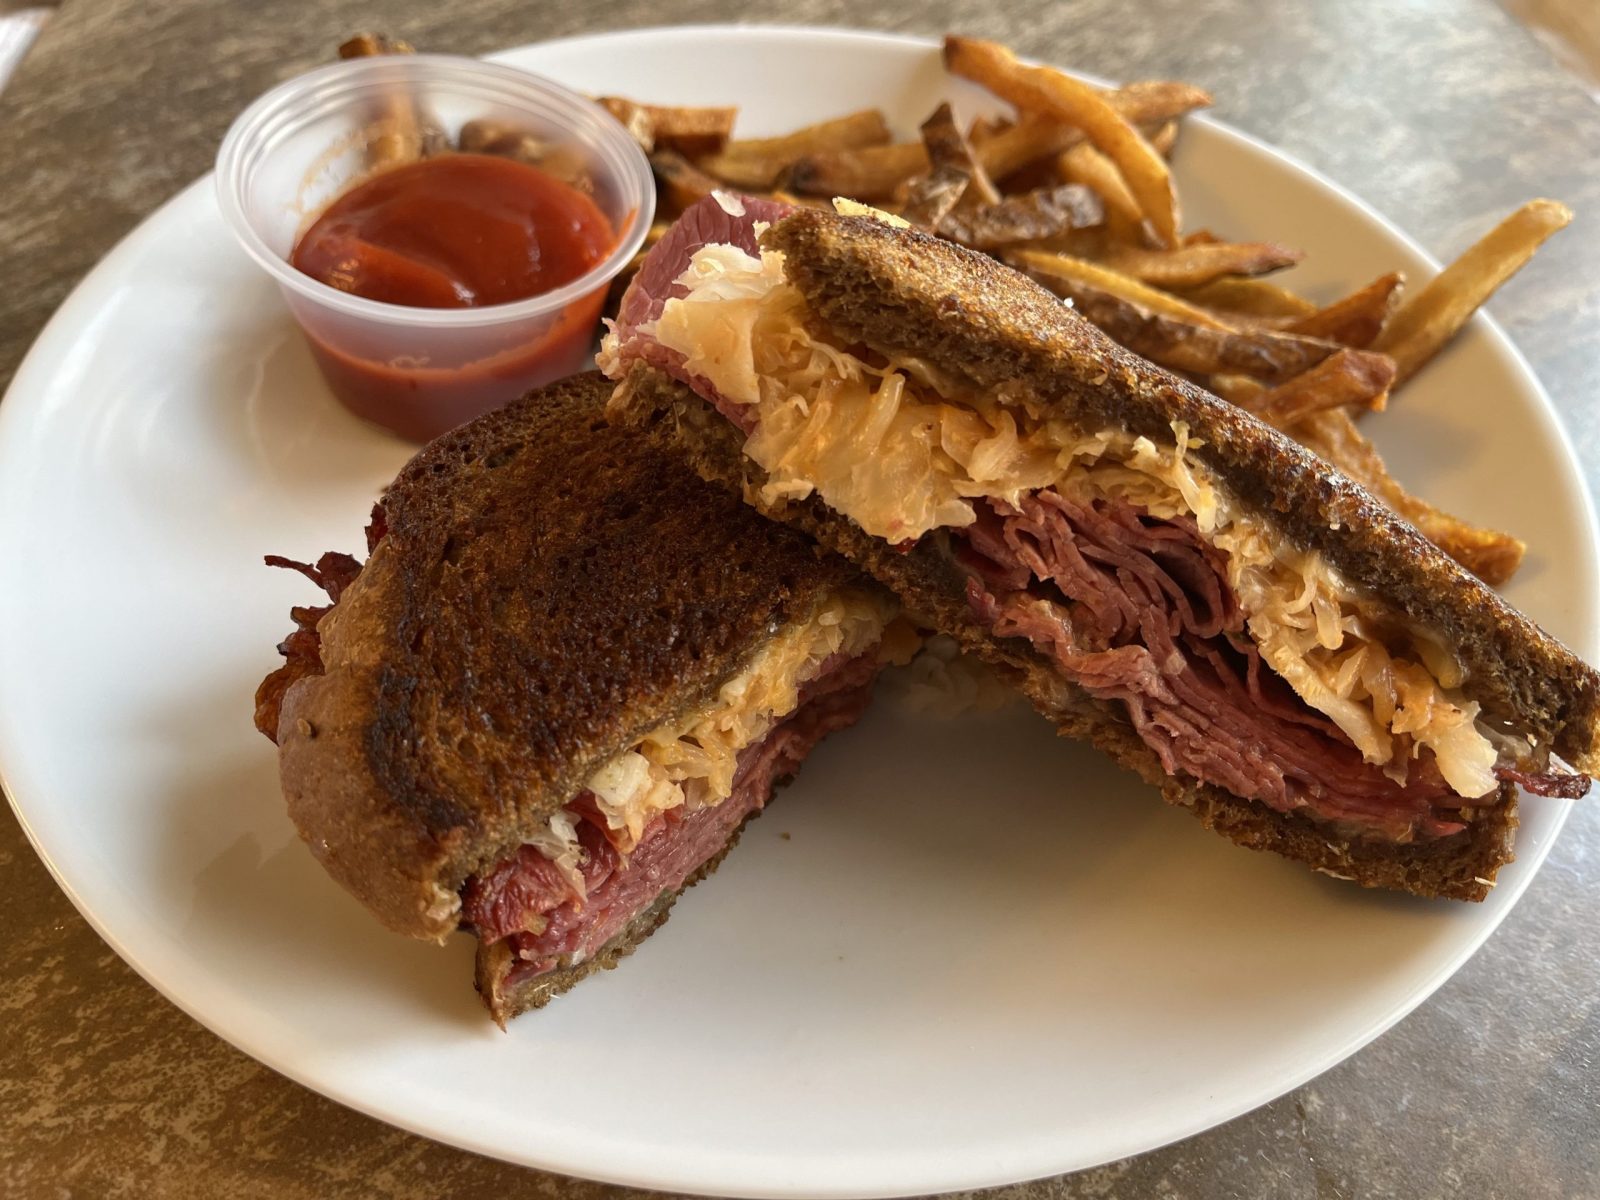 A Reuben sandwich and french fires sit on a white plate